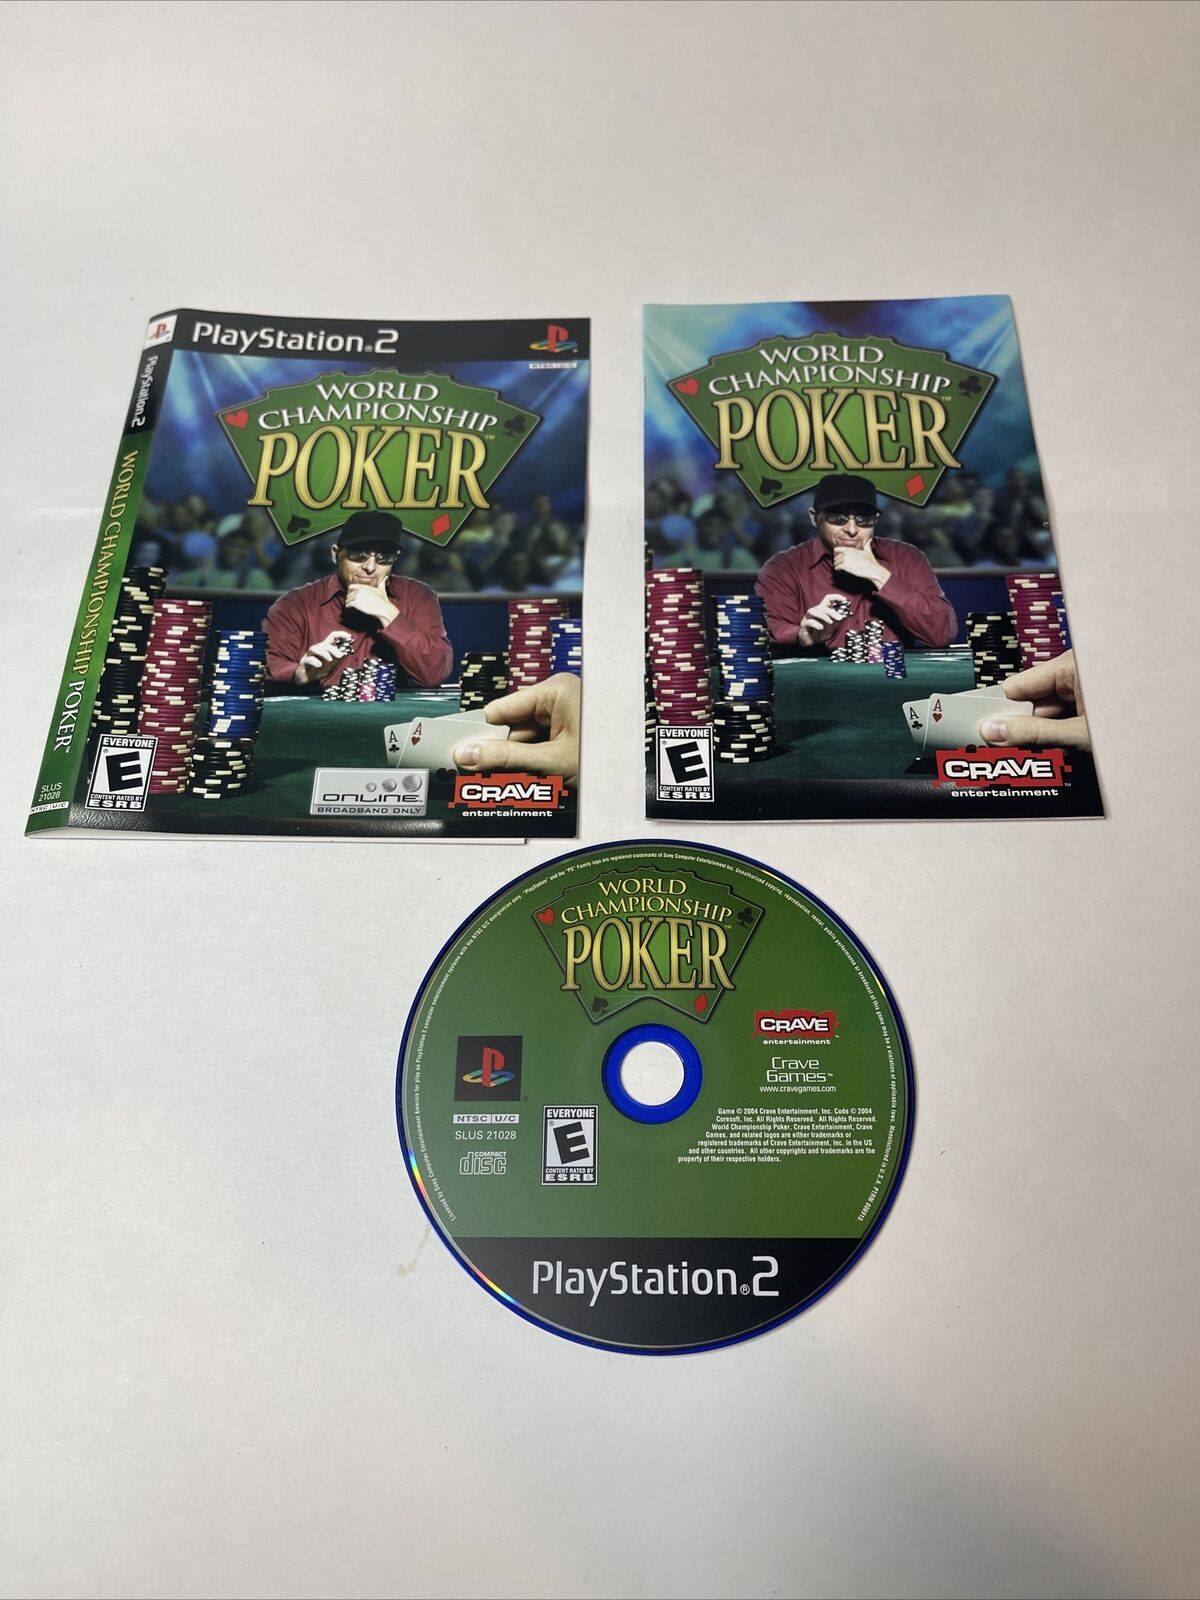 World Championship Poker (Sony PlayStation 2, 2004) Disc Manual Case Art TESTED